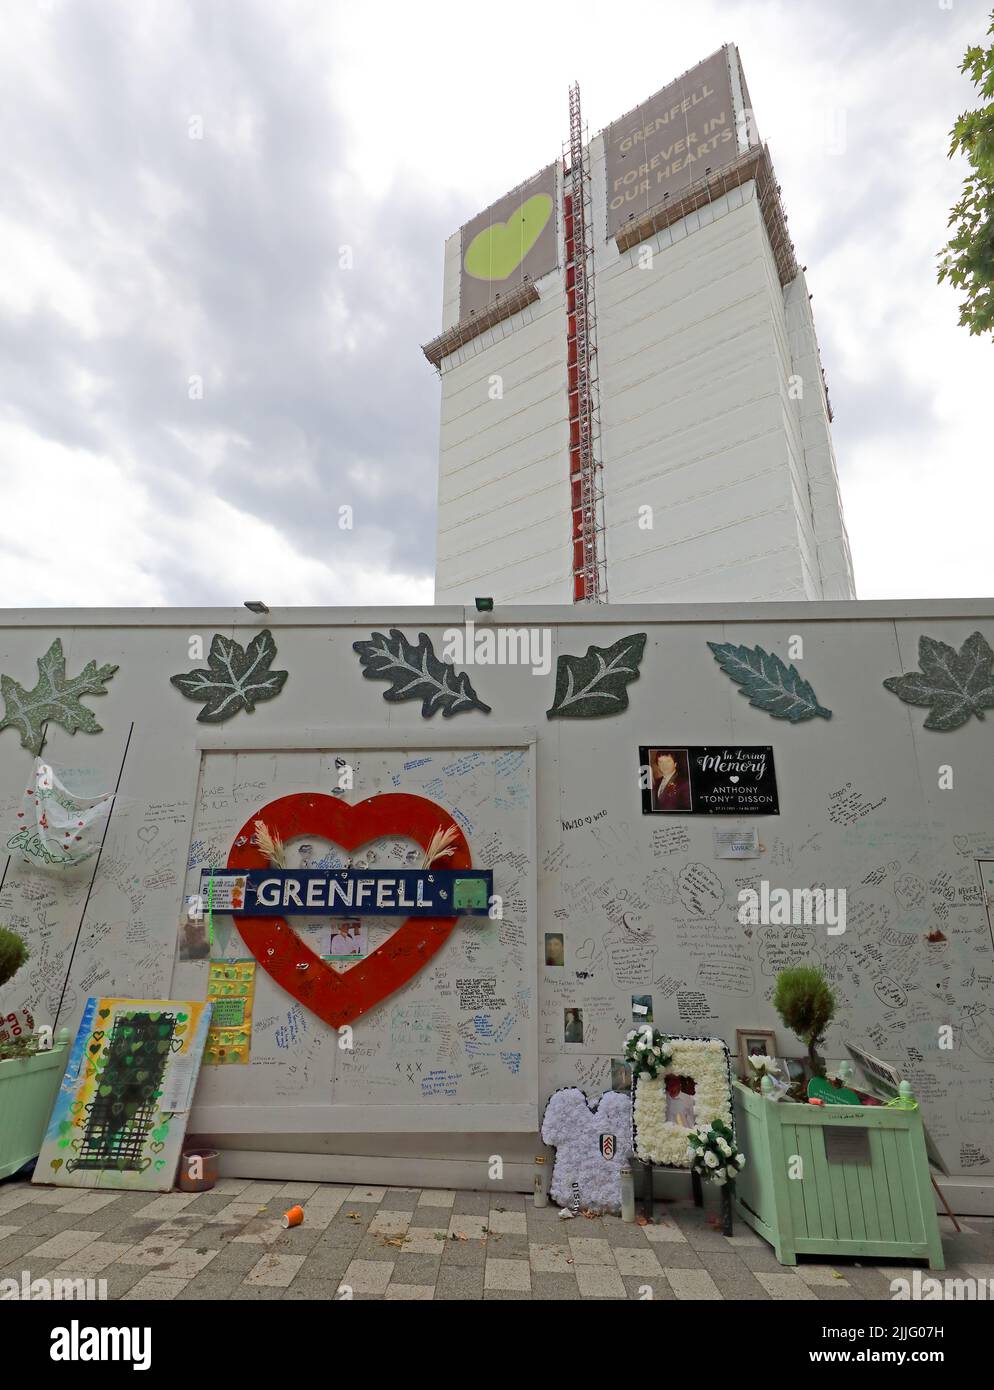 Grenfell Tower fire tragedy block, shown behind the memorial wall for the 72 victims. Grenfell United, Forever, after the cladding fire in 2017 Stock Photo